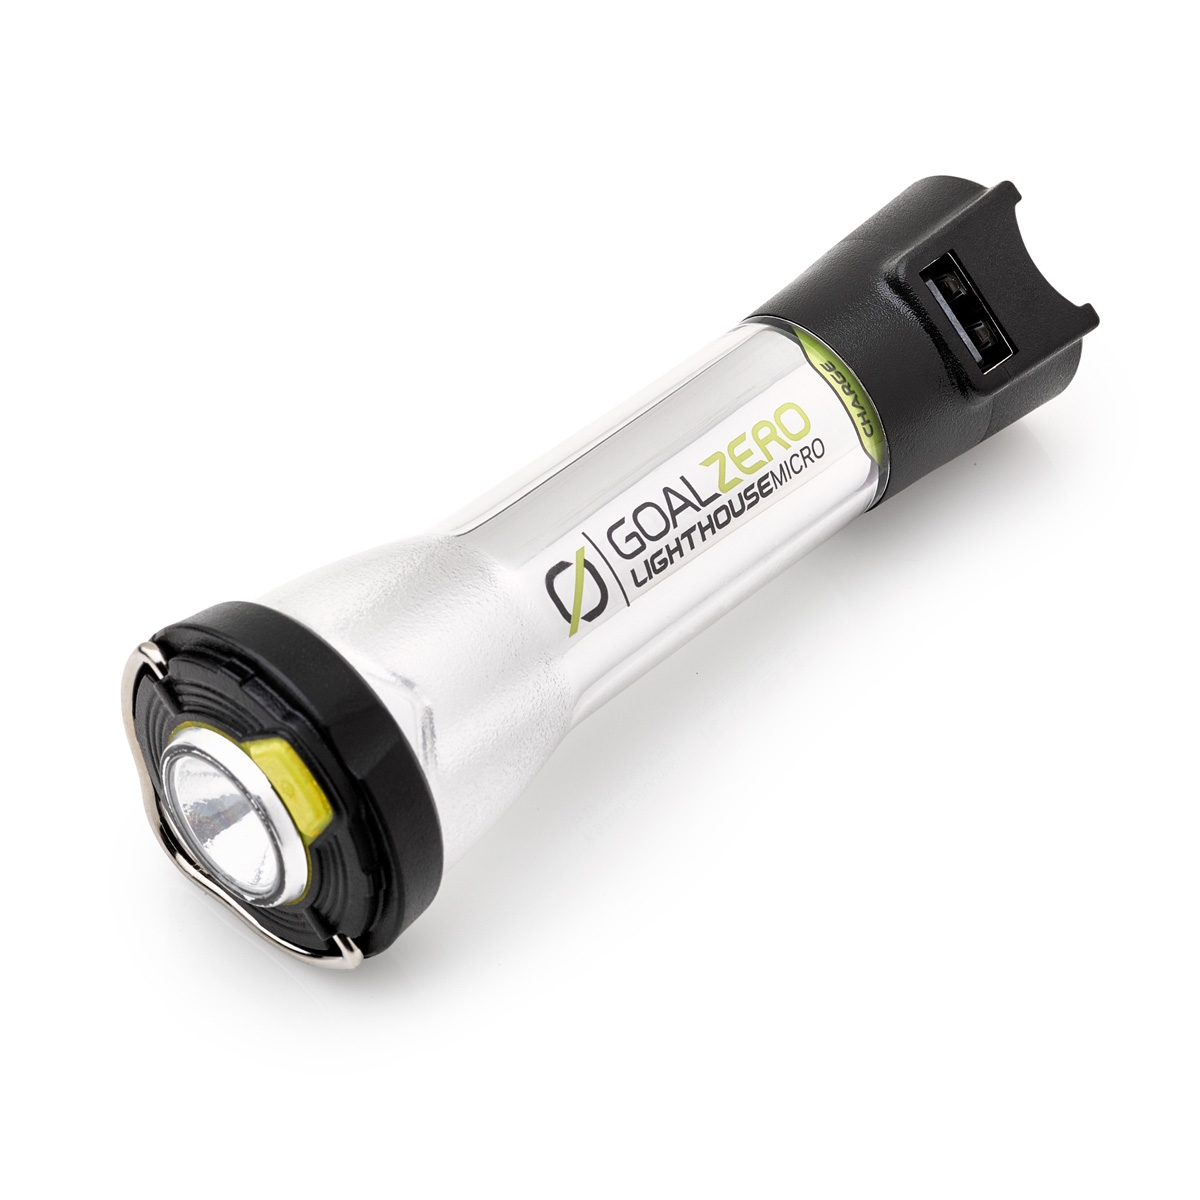 Lighthouse Micro Charge - LED Laterne mit USB Ladeausgang